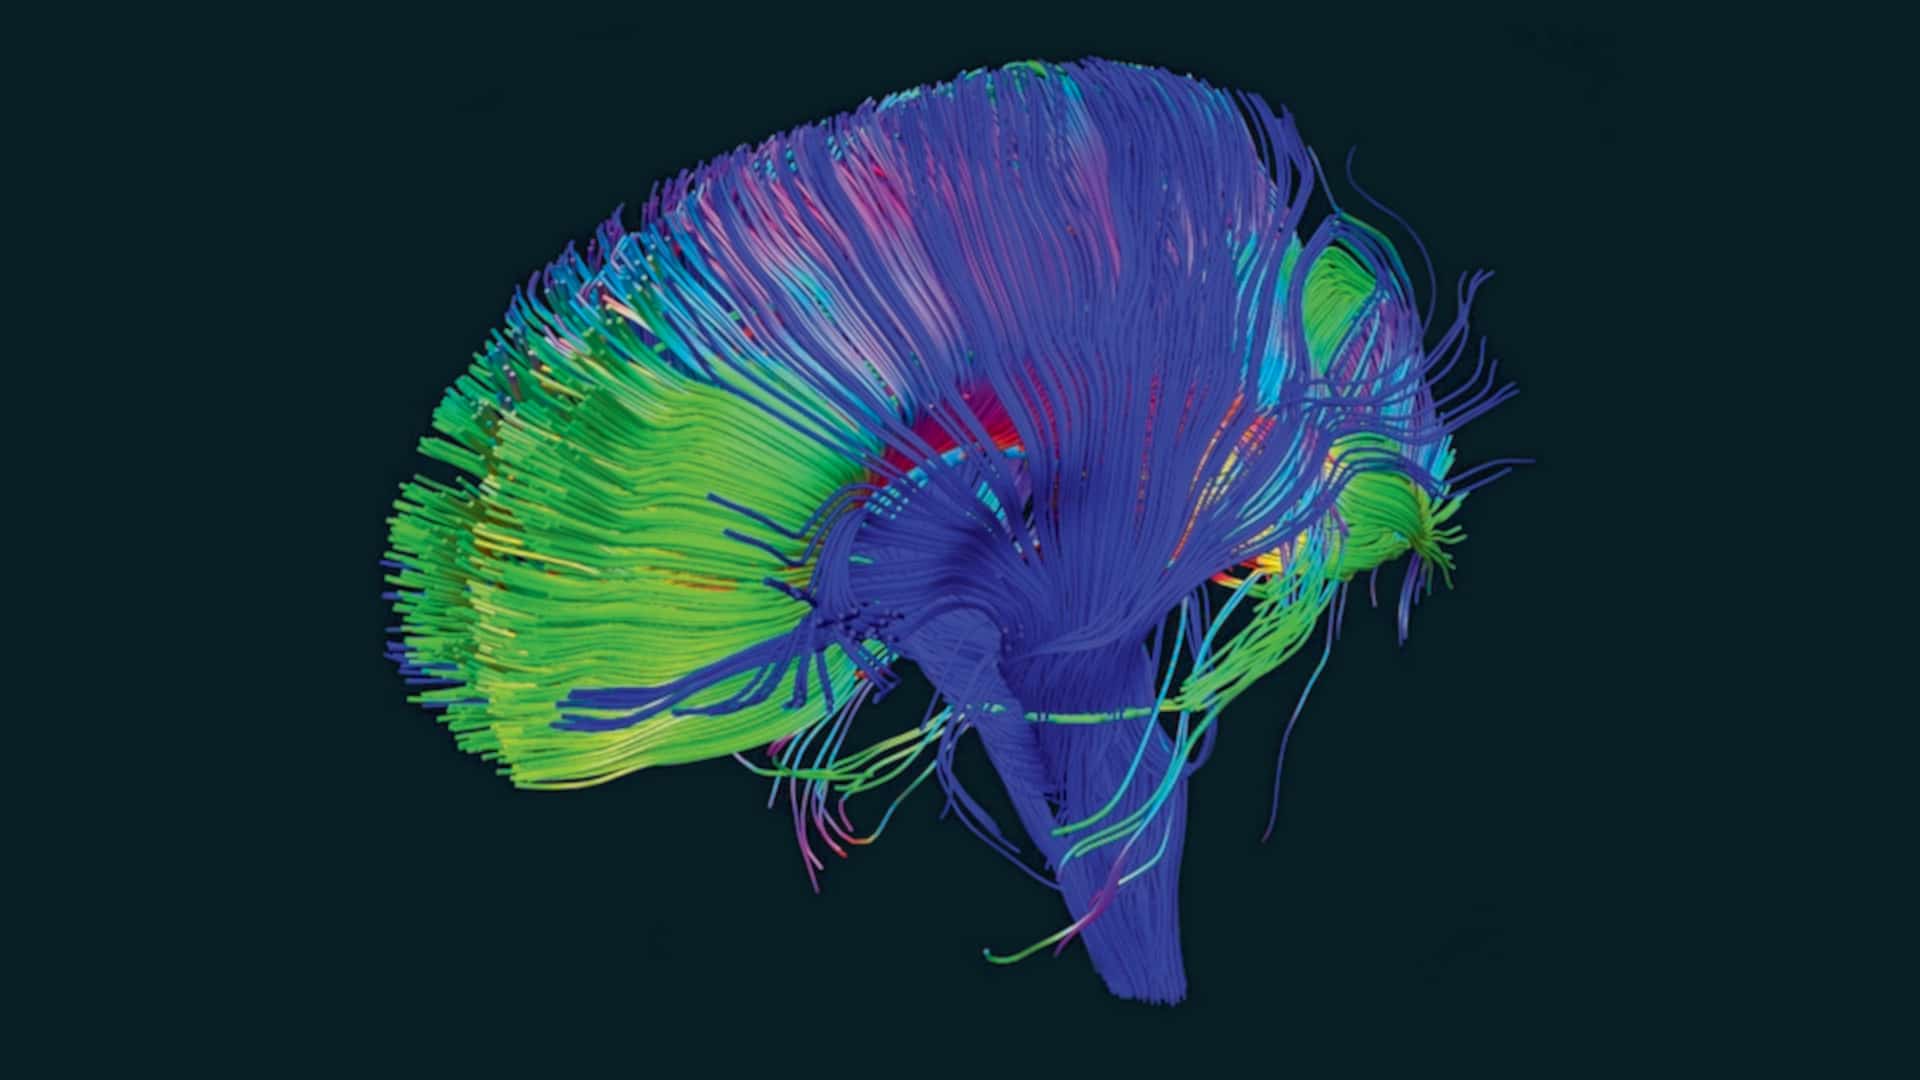 Neural pathways in the brain, determined from diffusion-tensor magnetic resonance imaging.